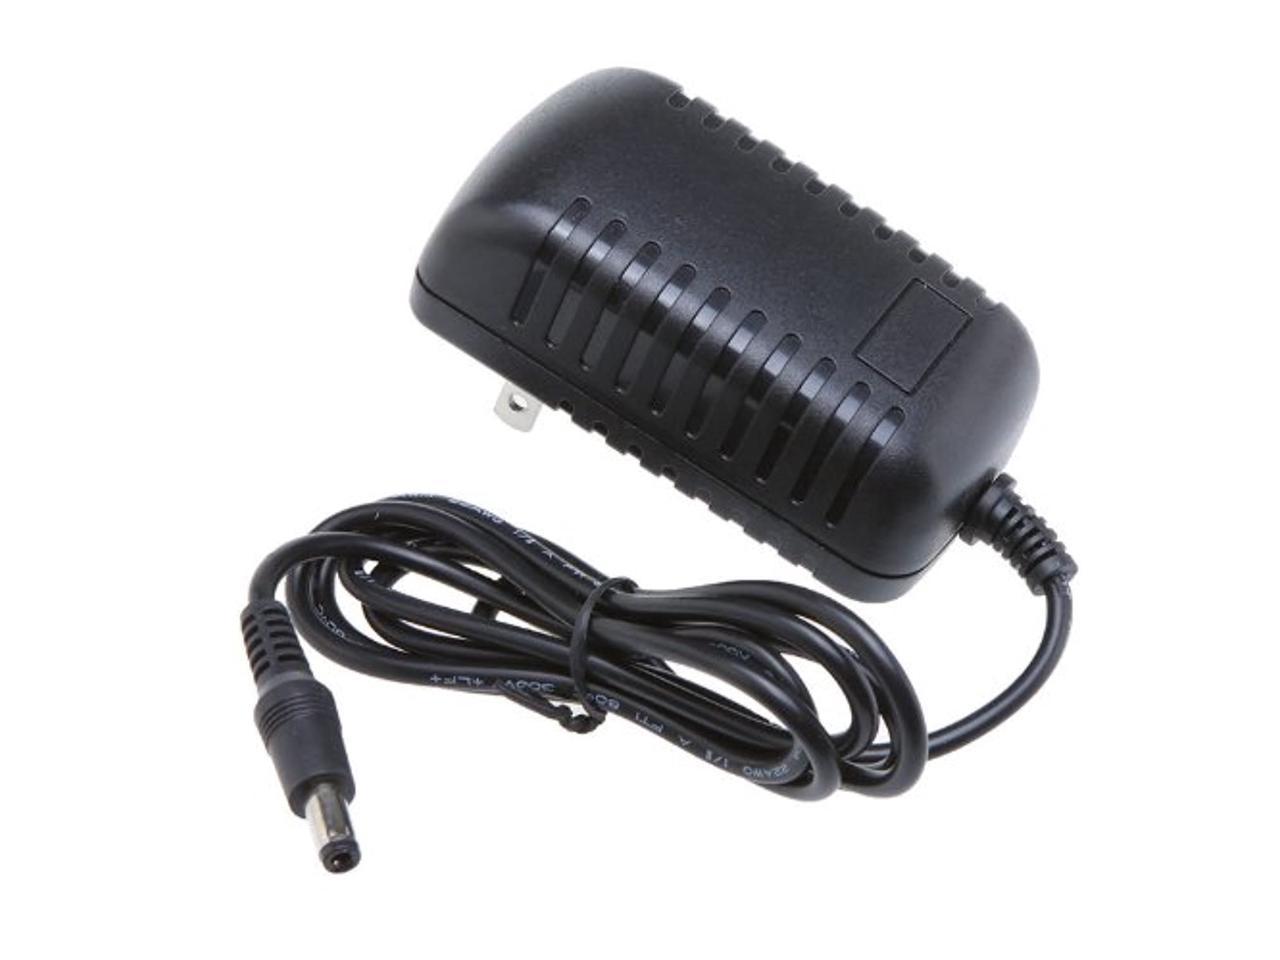 AC Adapter fr Yamaha YPG 535 YPG 525 YPG535 YPG525 Keyboard Charger Power Supply 